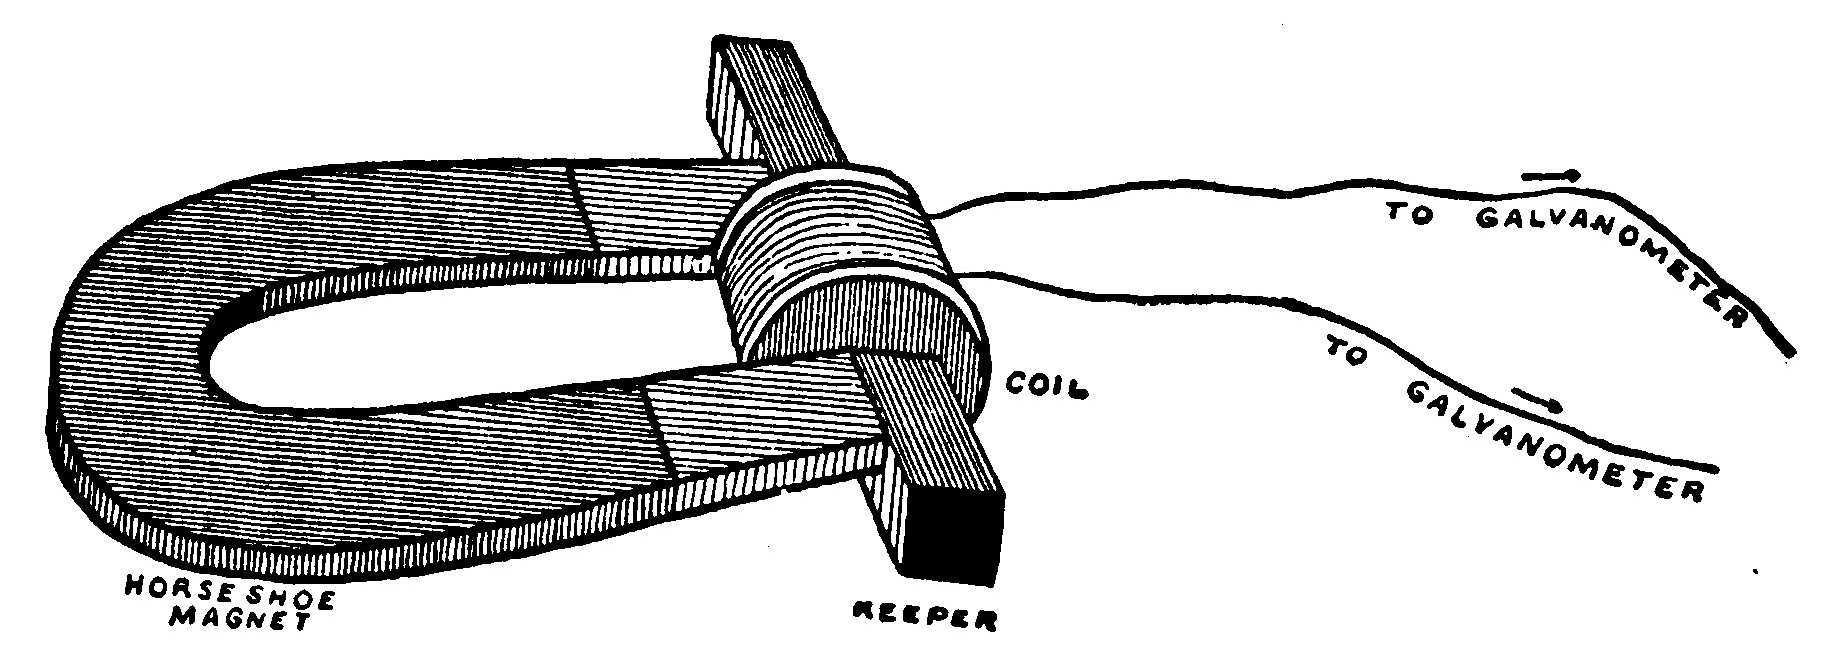 Fig. 87.—A Horseshoe Magnet and a Coil arranged to produce Electric Currents by Induction.